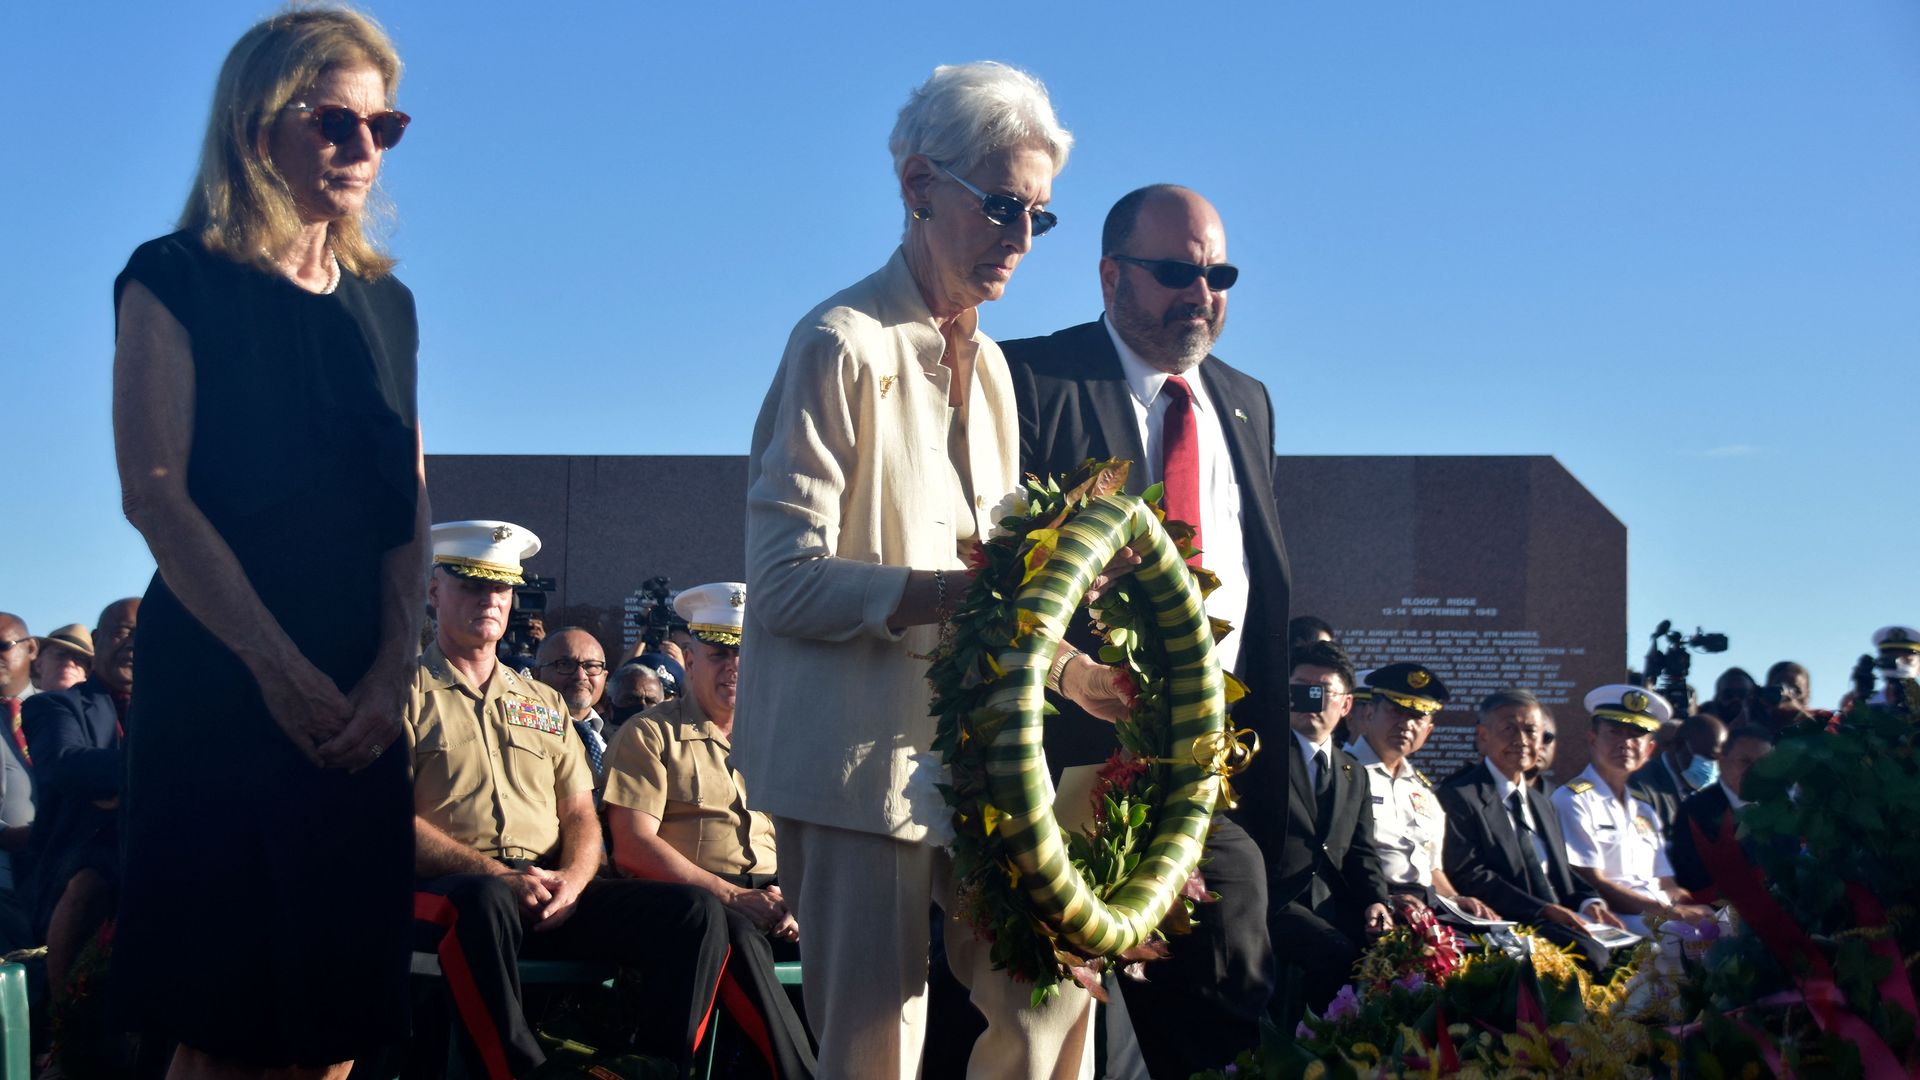  Wendy Sherman (C) lays a wreath next to Caroline Kennedy (L) during a ceremony marking the 80th anniversary of the Battle of Guadalcanal in Honiara on the Solomon Islands